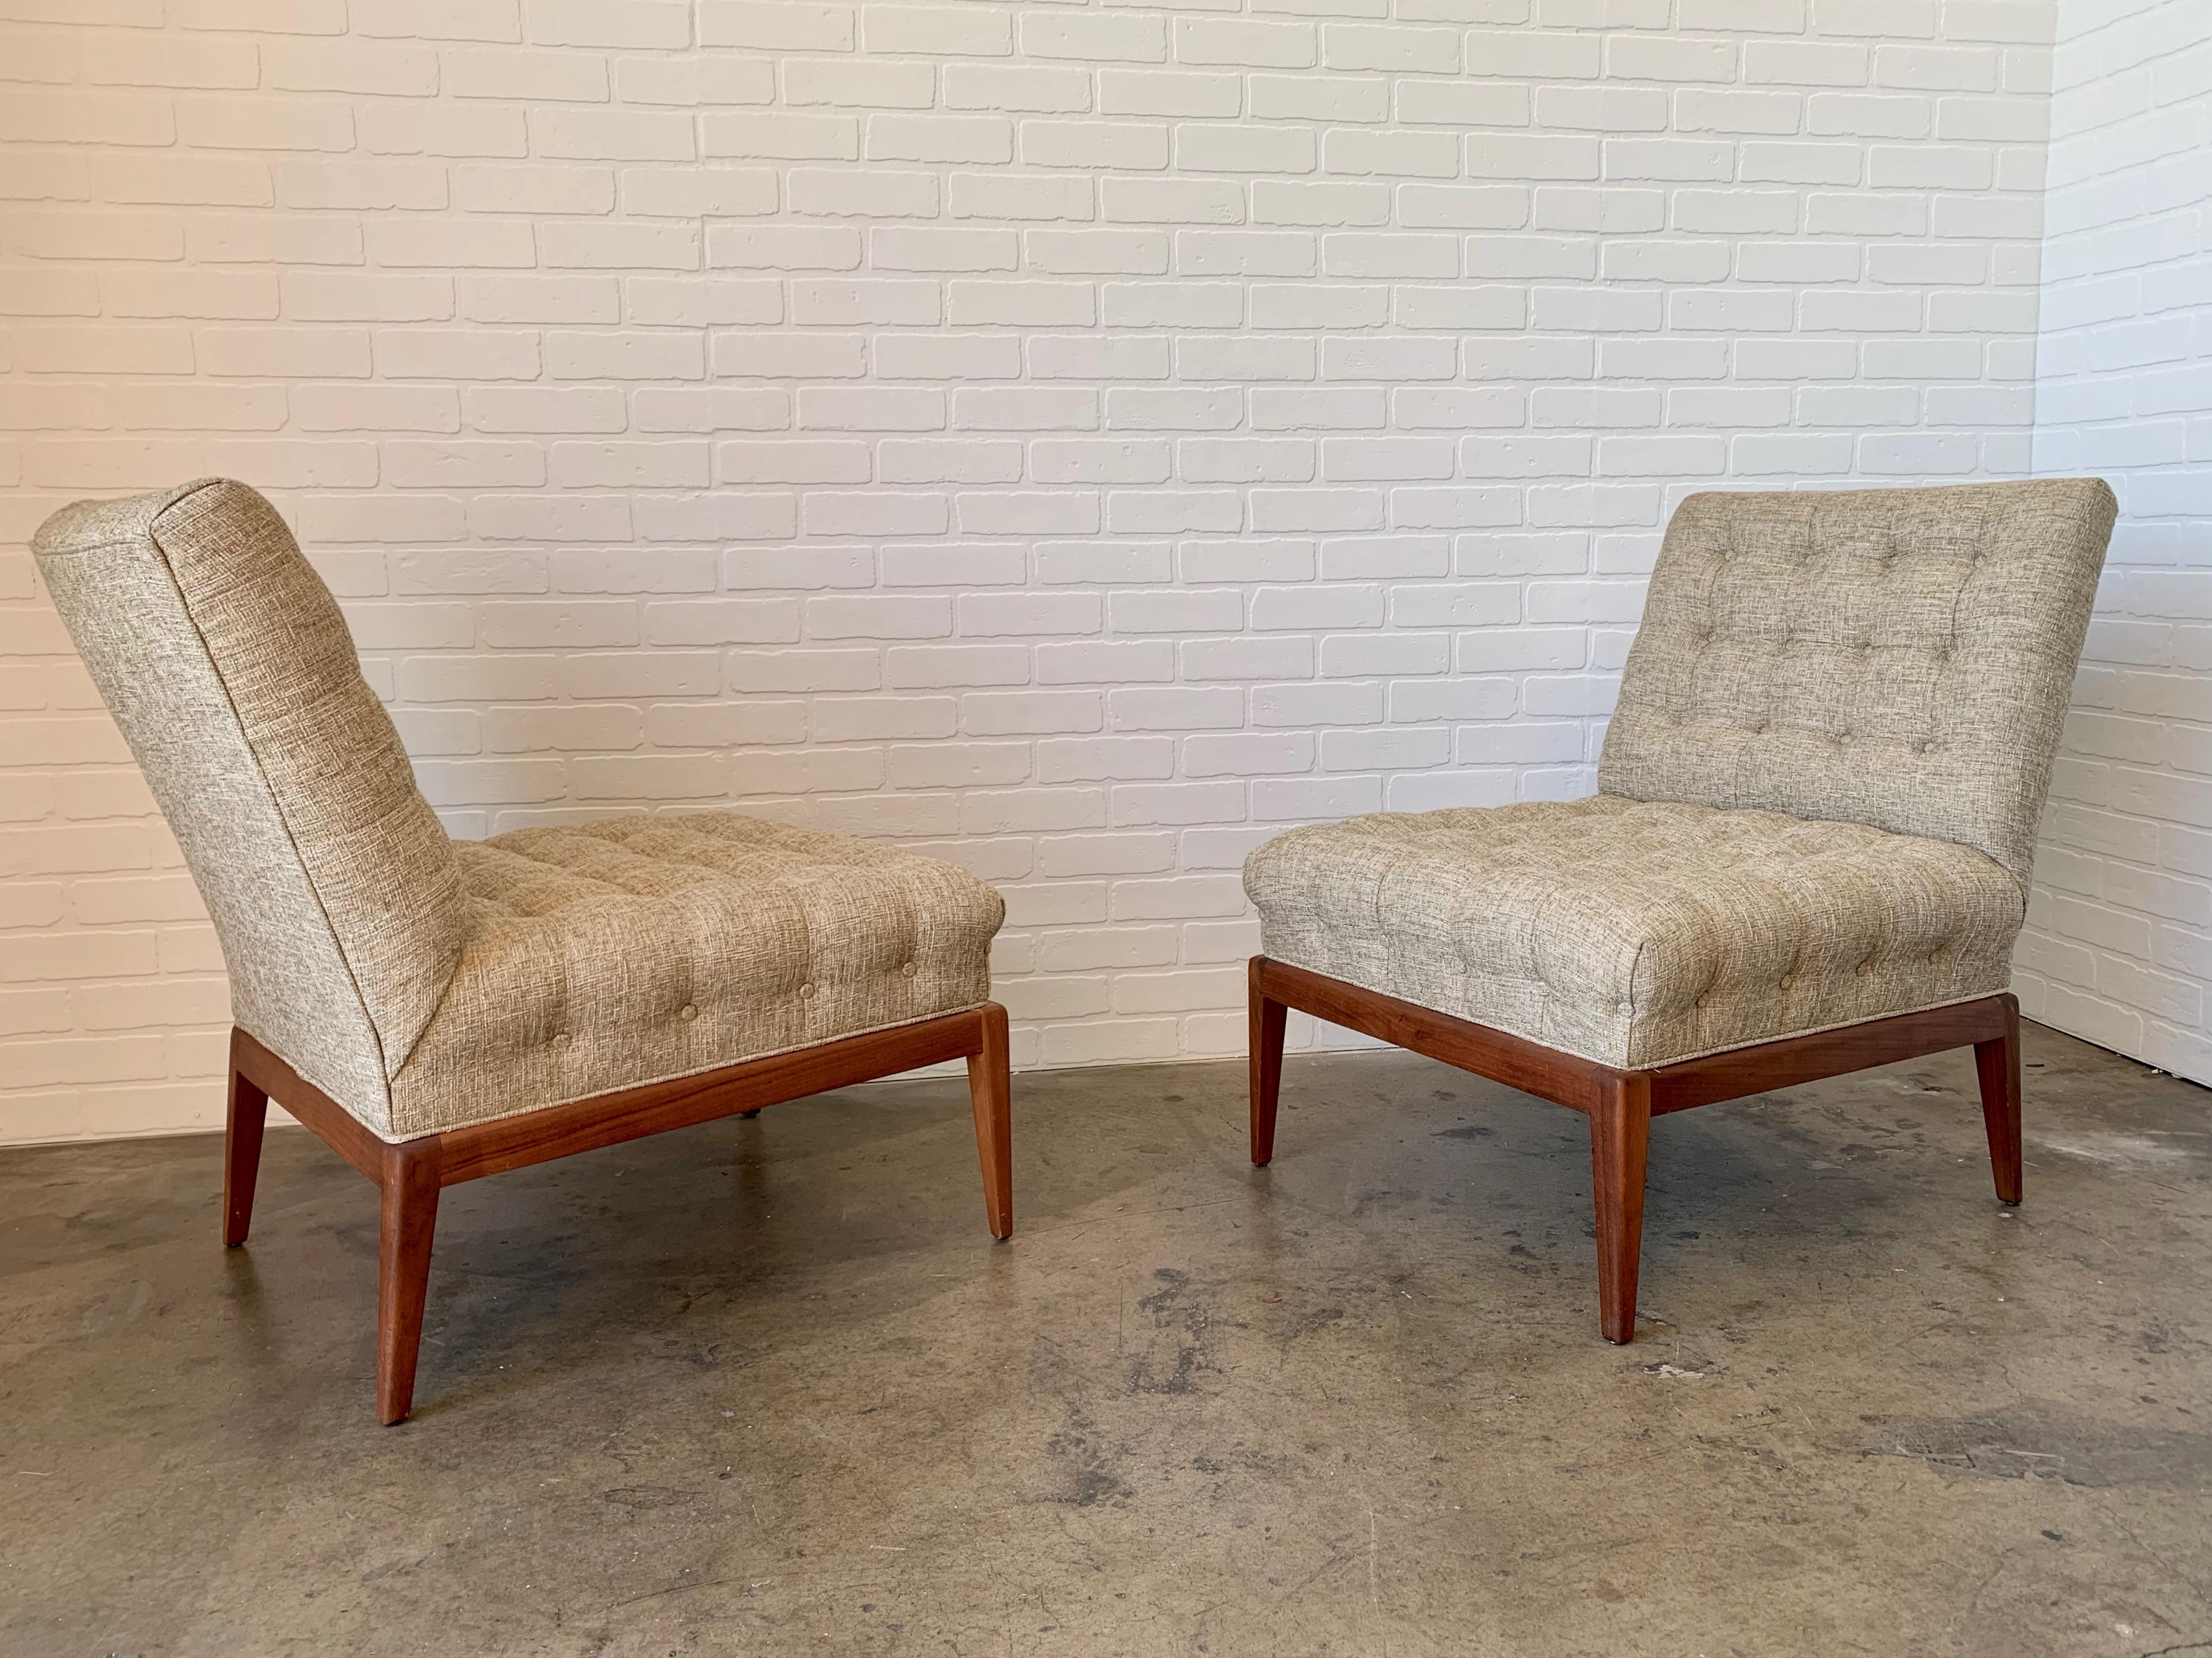 Pair of tufted slipper lounge chairs by Kipp Stewart.